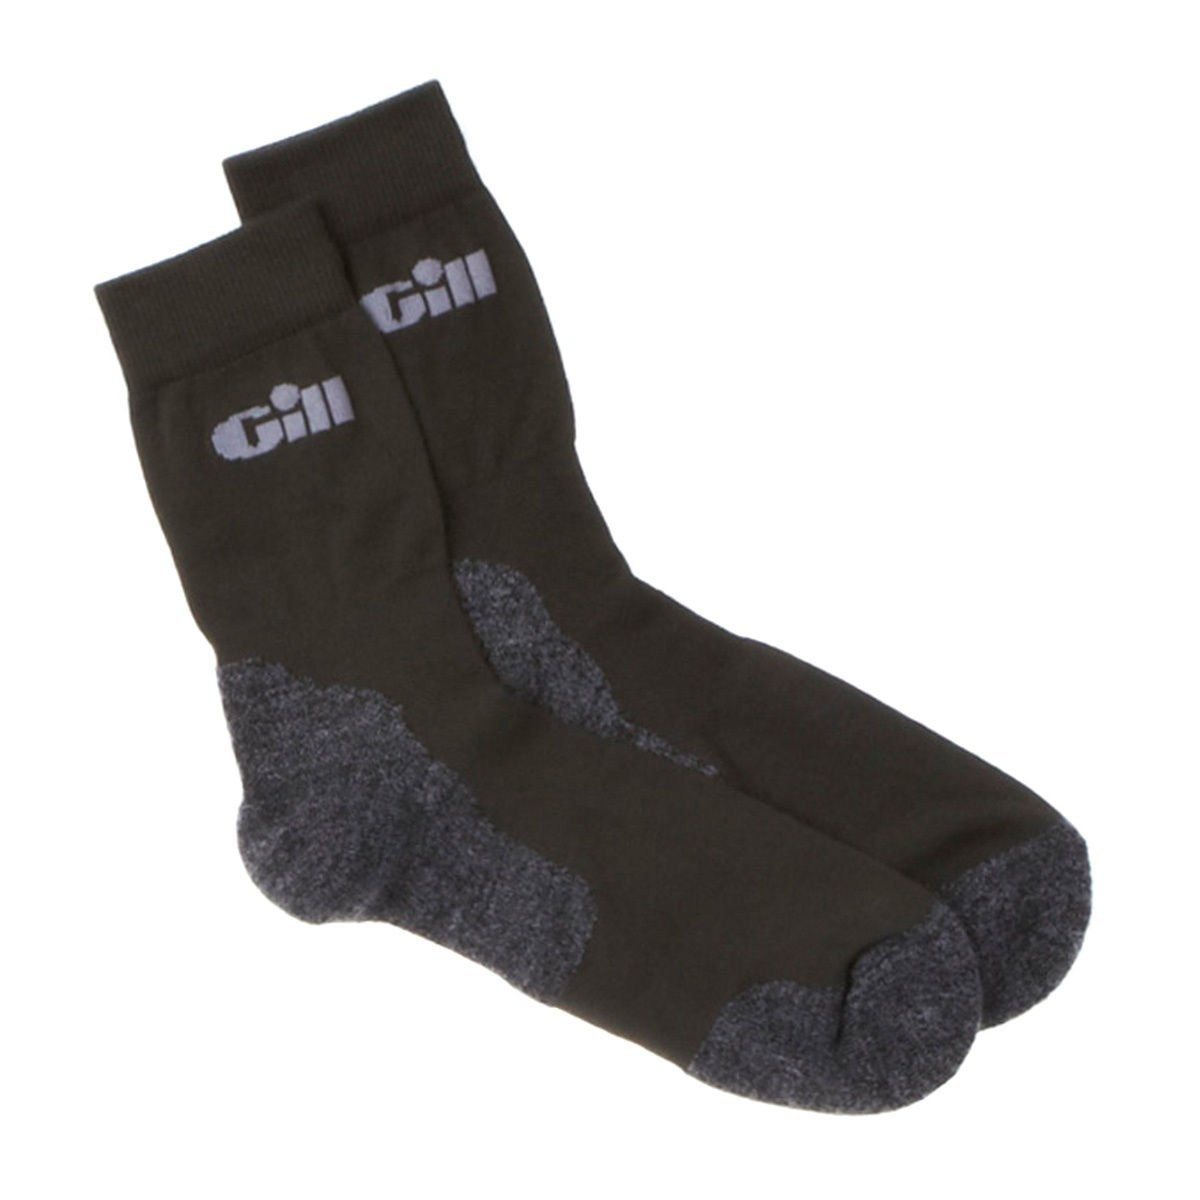 Pure Similarity In fact Gill 756 Lightweight Carbon Sailing Socks UK Size 3 - 6 - TCS Chandlery Ltd